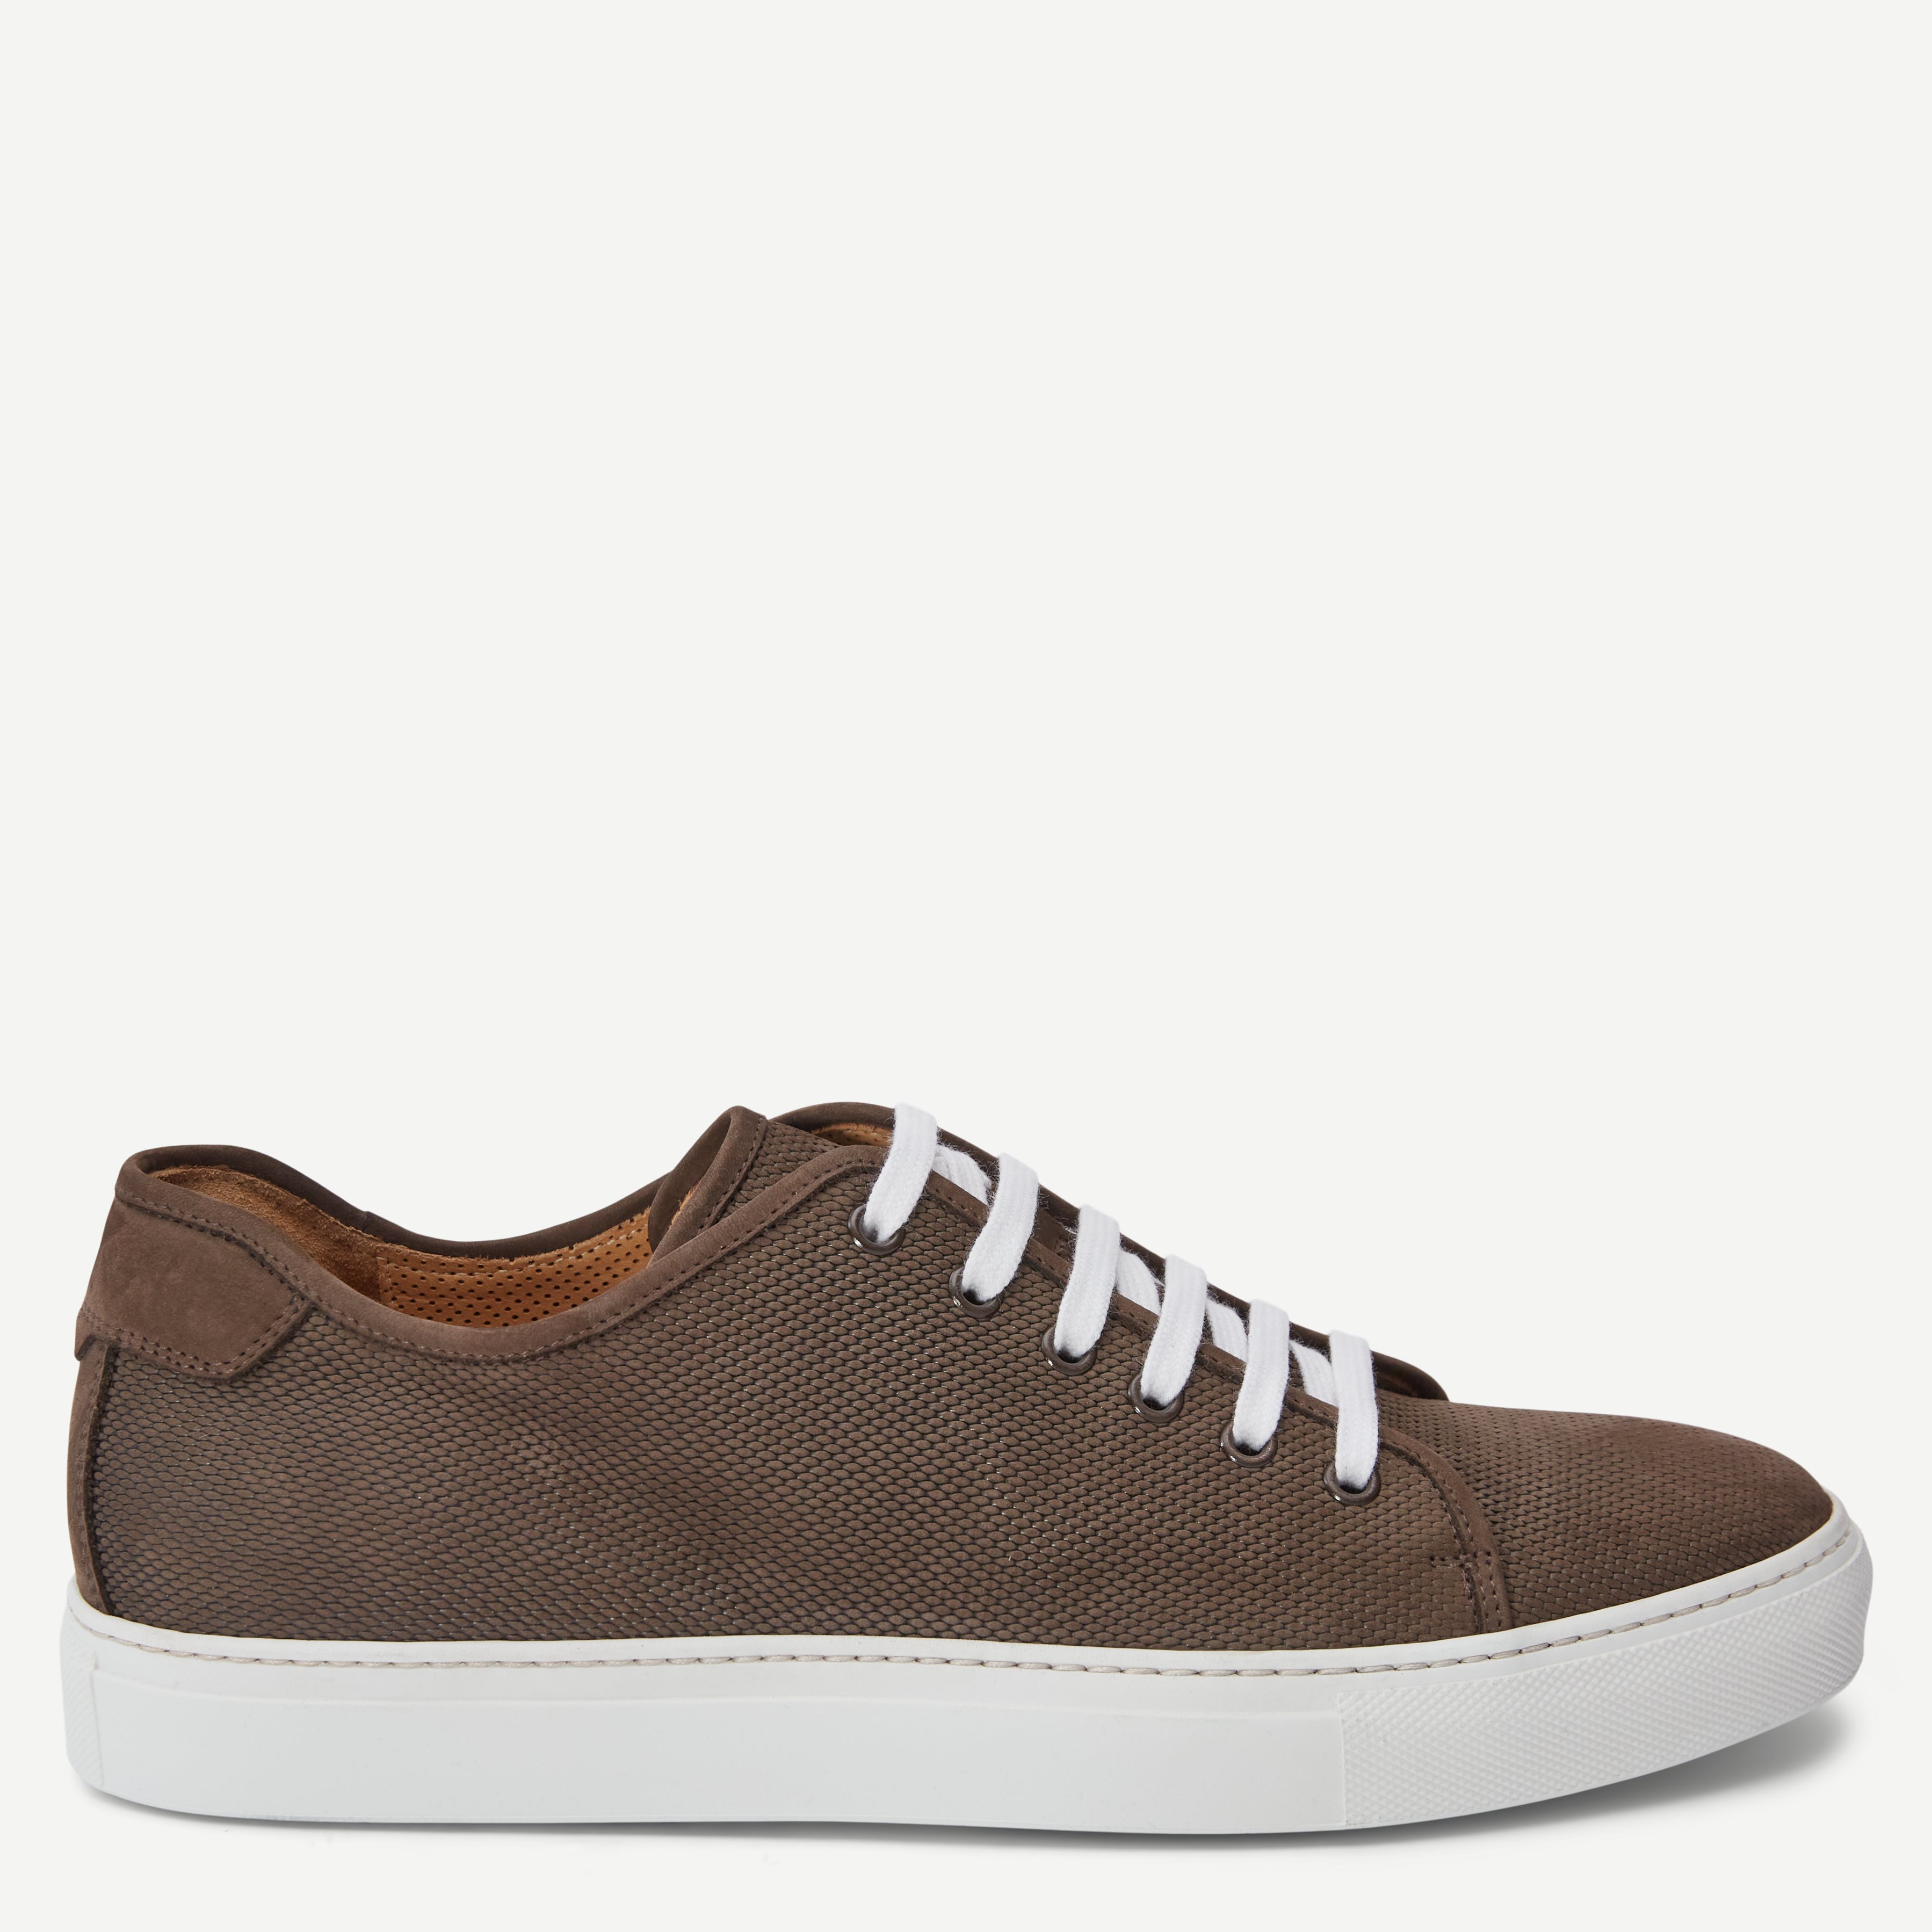 Shoes - Brown